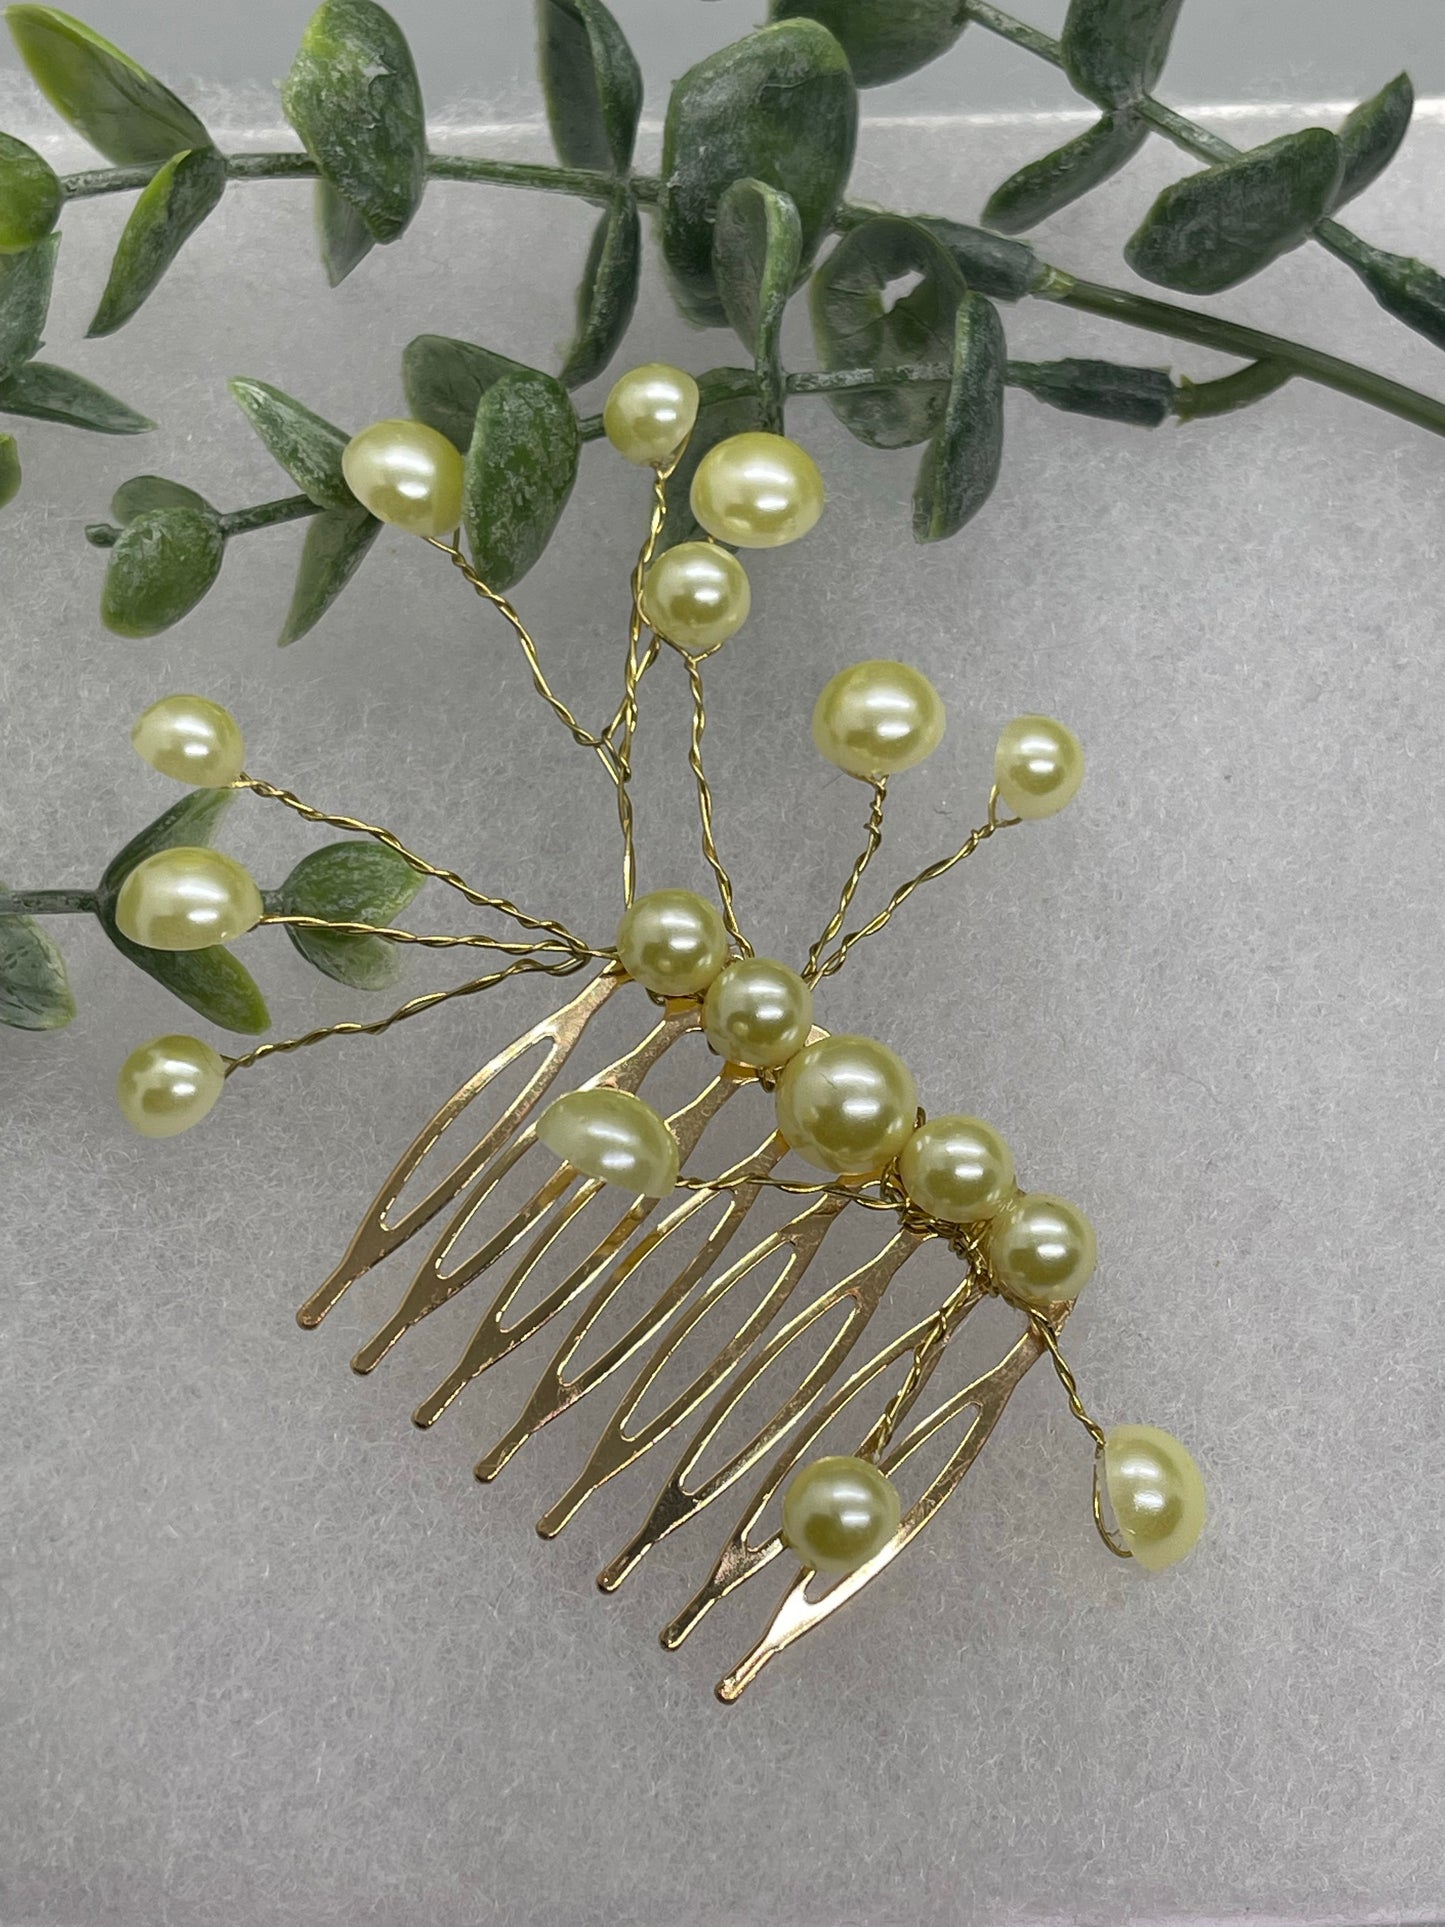 Yellow faux Pearl 2.0” gold tone bridal side Comb accents vine handmade by hairdazzzel wedding accessory bride